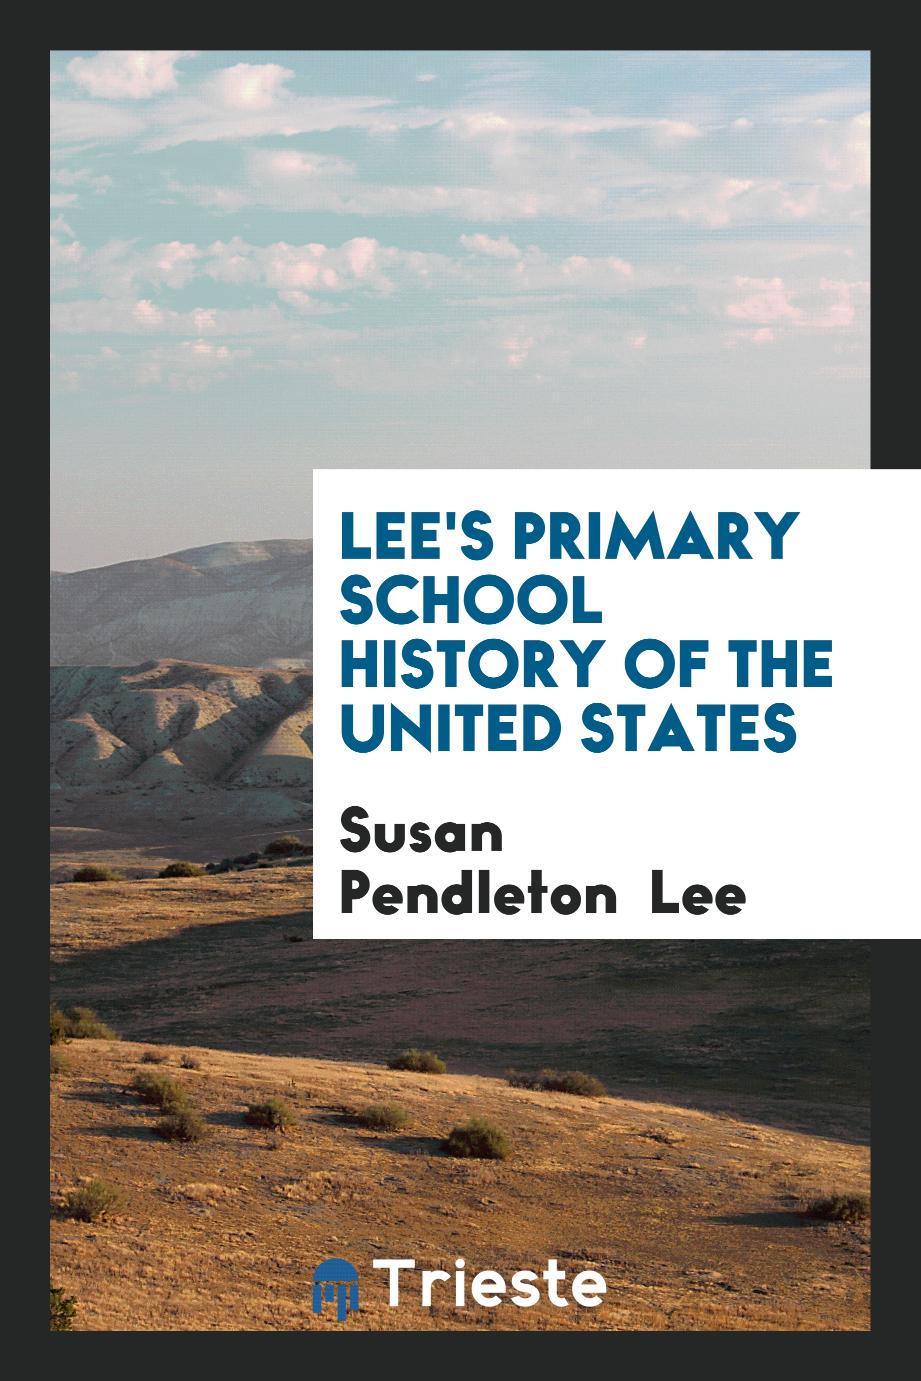 Lee's primary school history of the United States